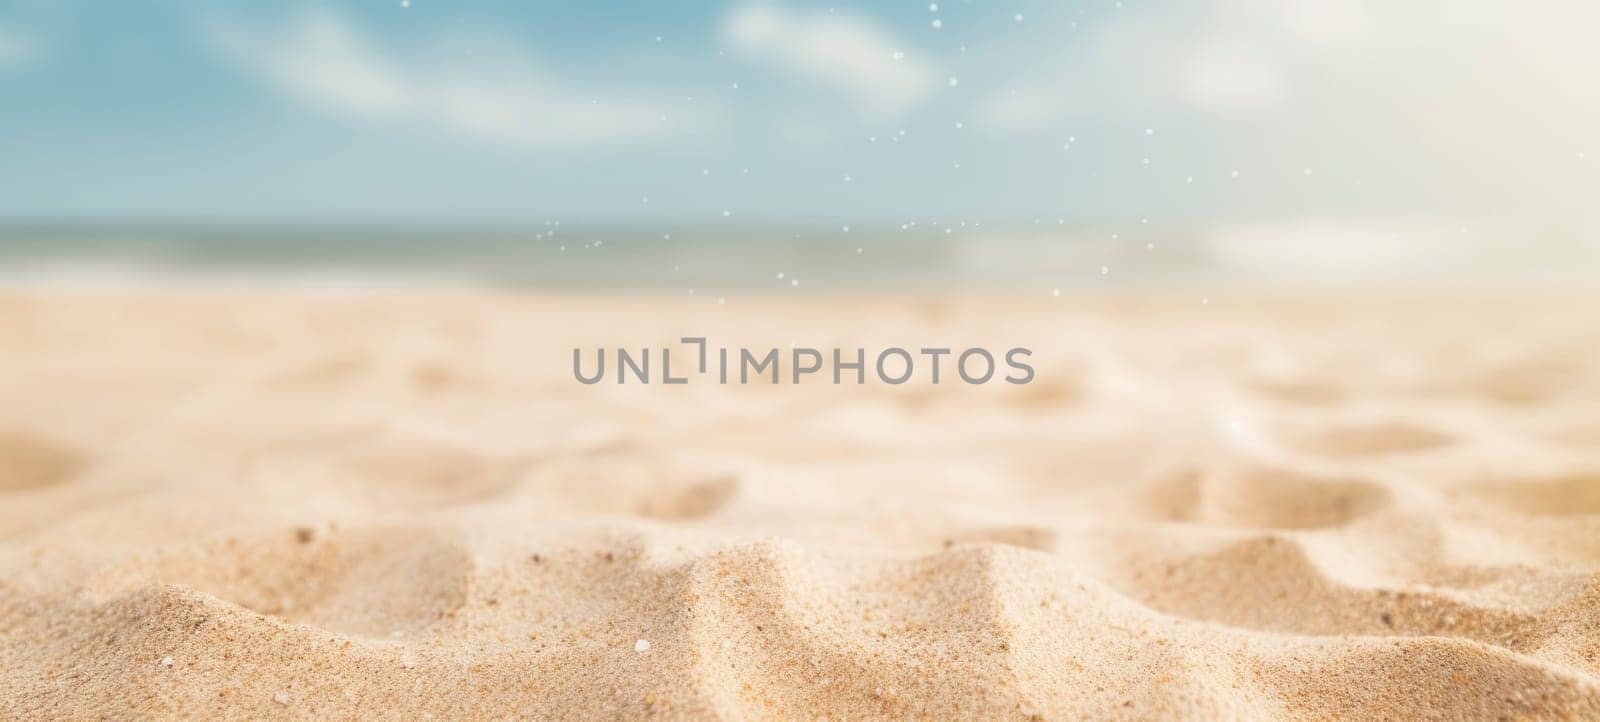 Close-up of a tranquil sandy beach with a soft-focus ocean in the background and particles glistening.